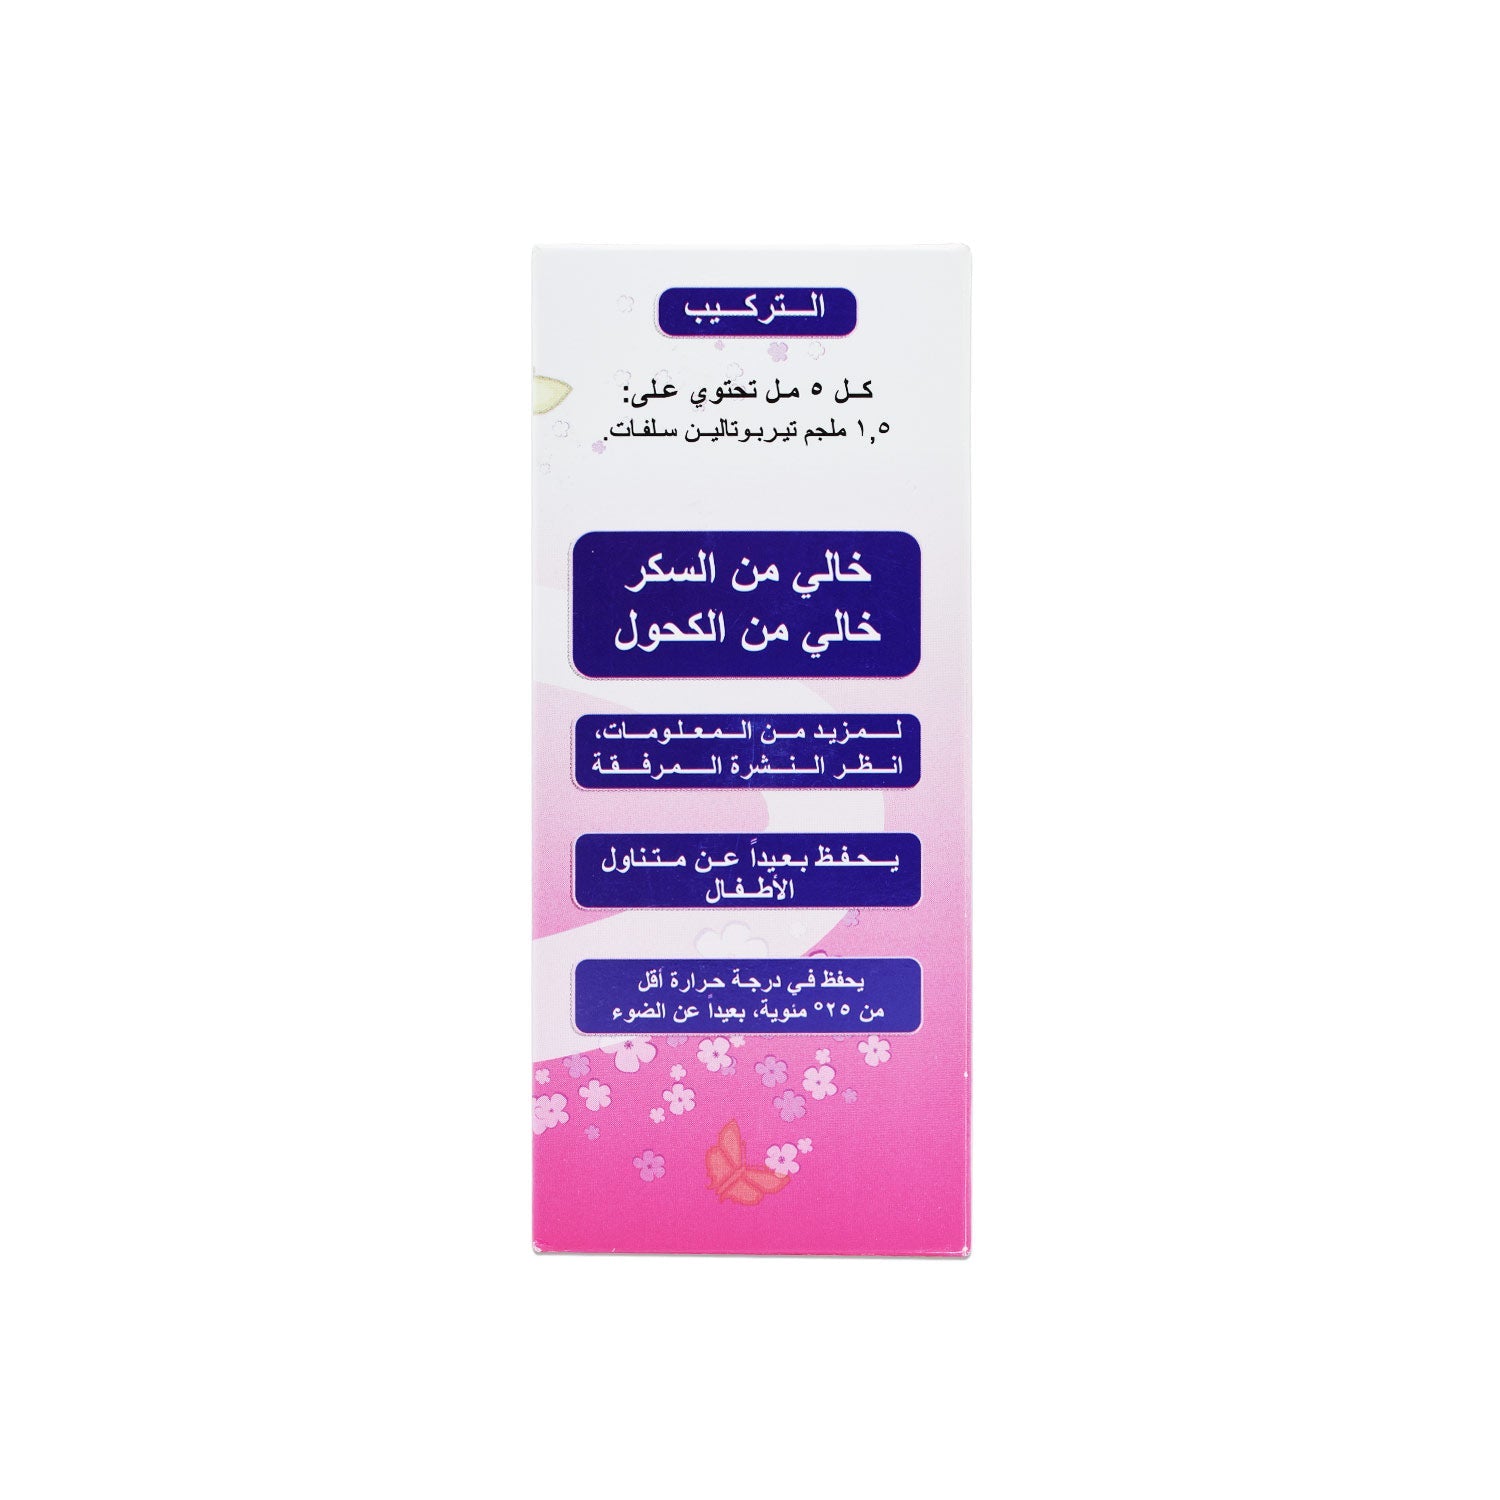 Buy Dilanyl 100 ml Syrup online in Qatar- View Usage, Benefits and Side ...